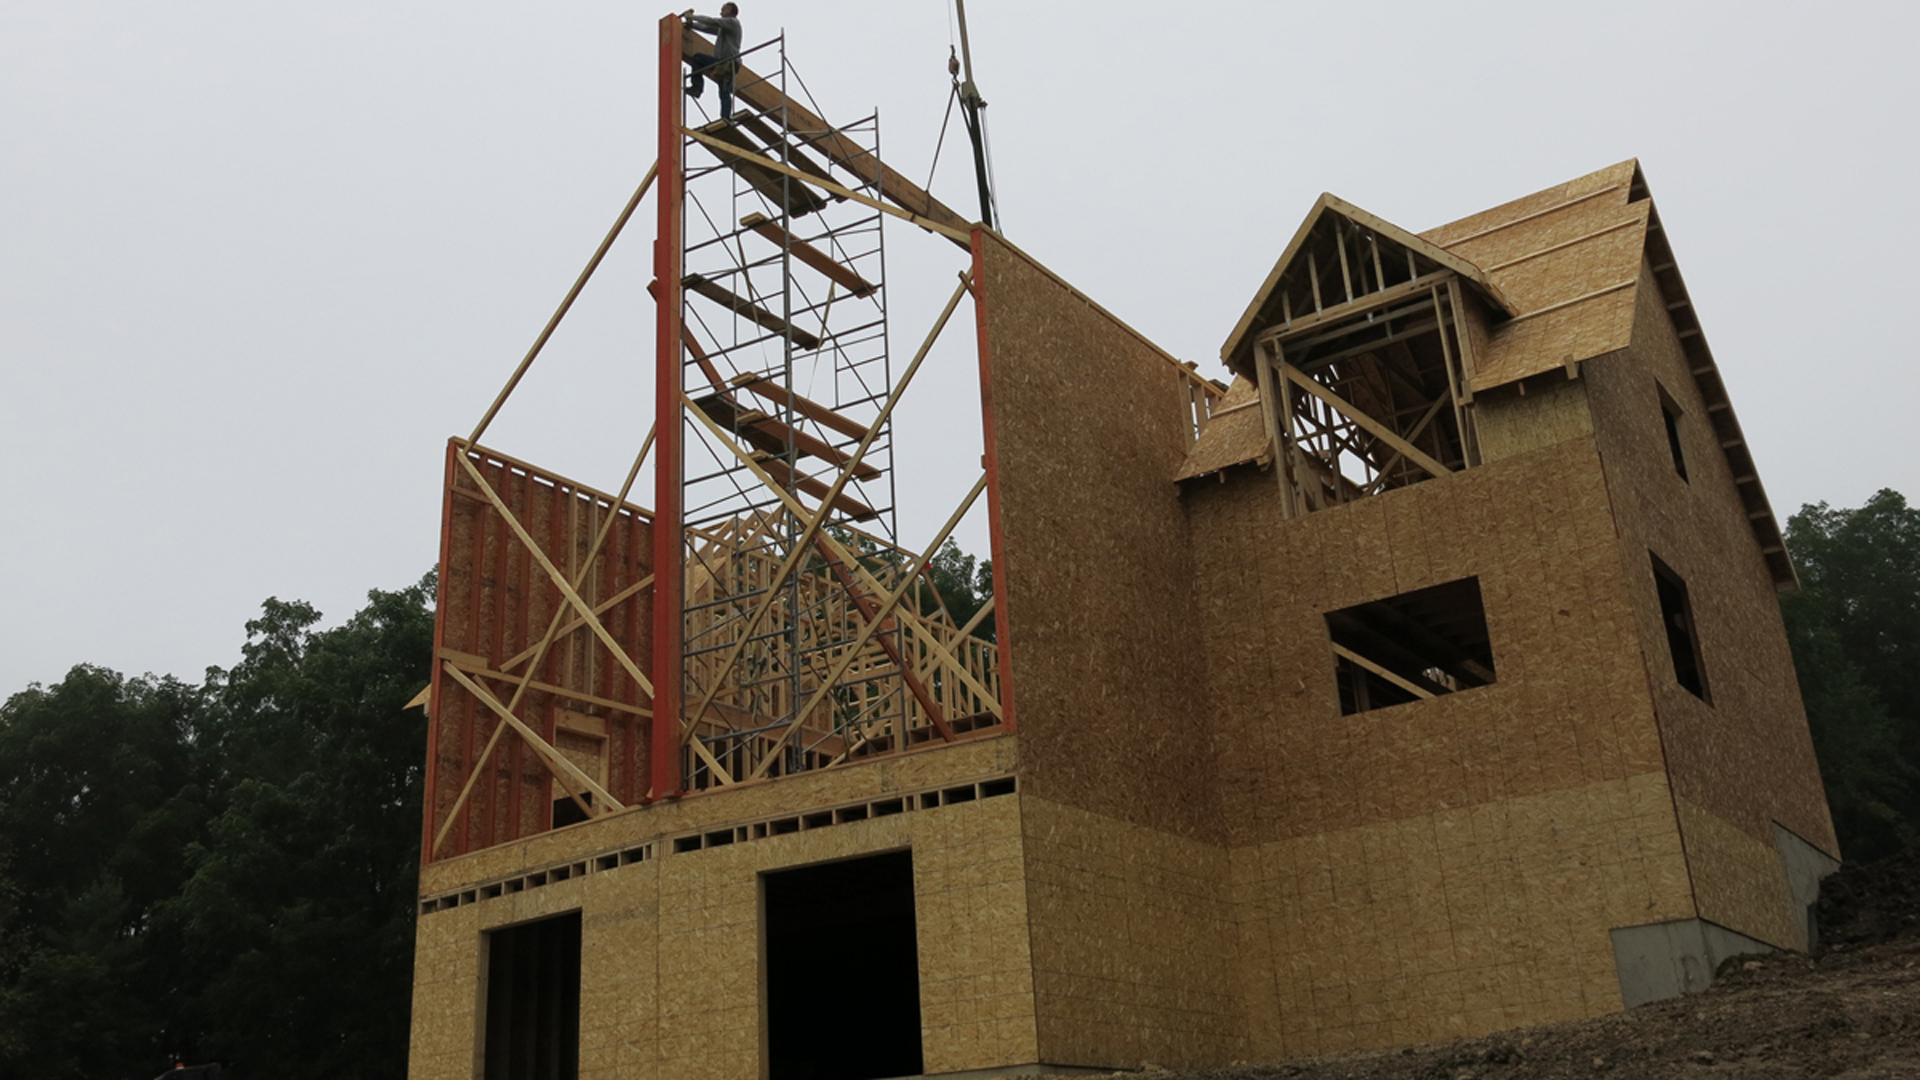 Dodgeville Residential & Commercial Construction